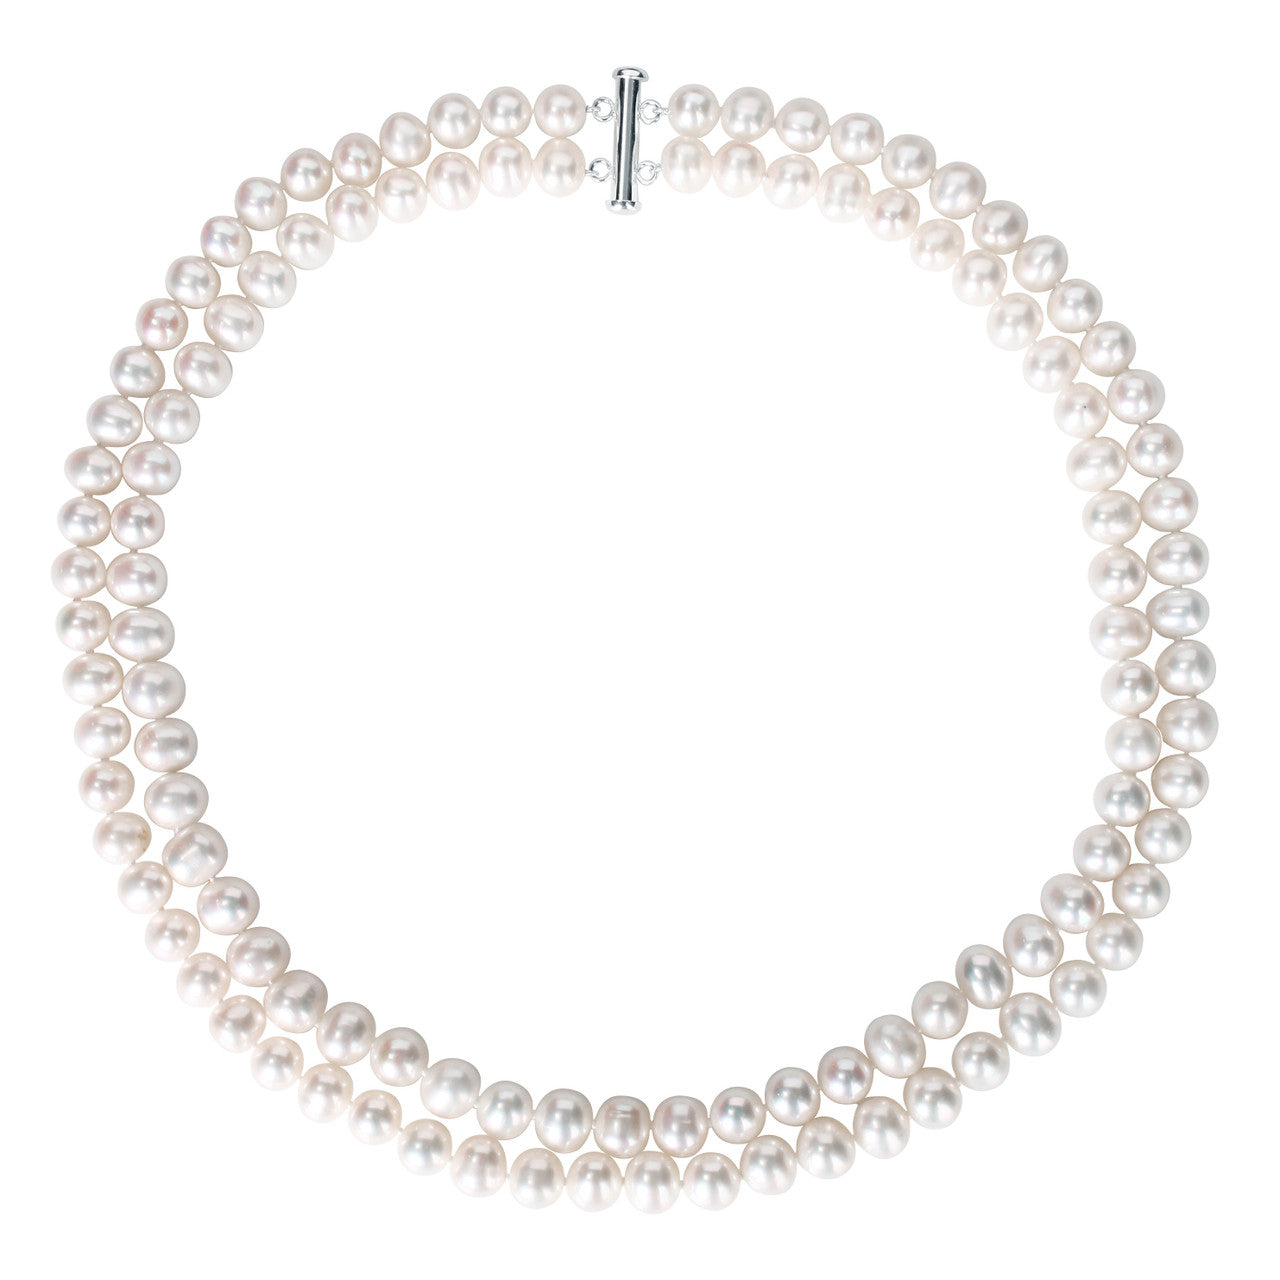 Ice Jewellery 9-10mm Double-Strand Freshwater Pearl Necklace with Sterling Silver Clasp - 7500695187 | Ice Jewellery Australia